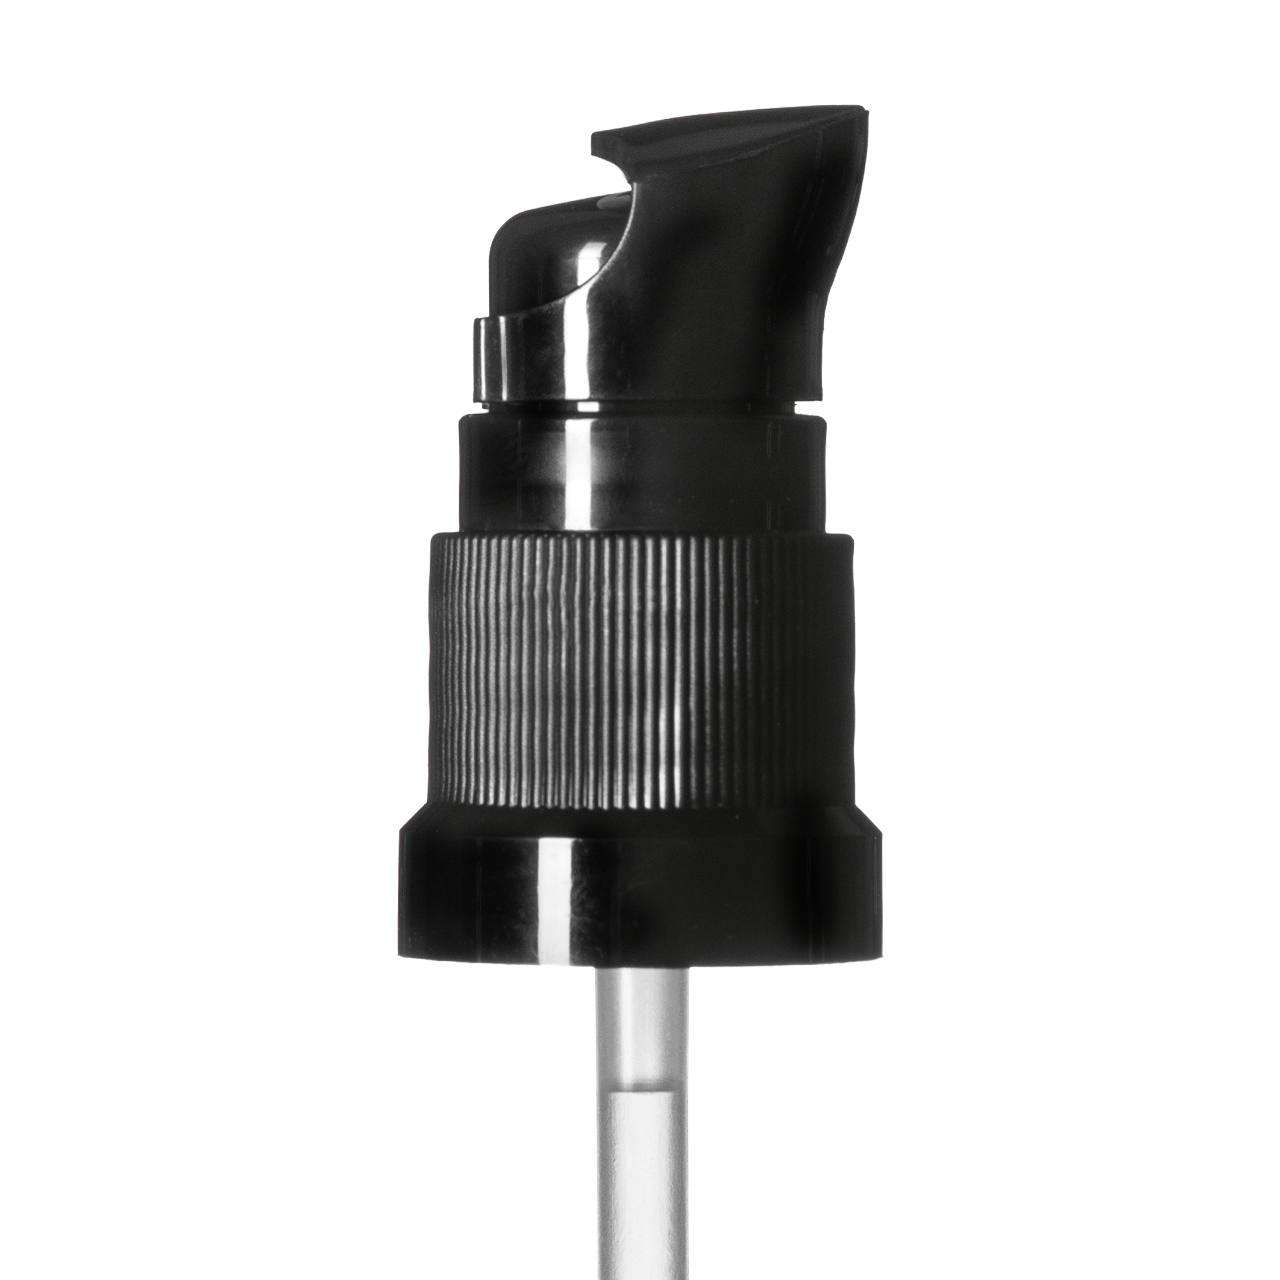 Lotion pump Metropolitan stepped, DIN18, PP, black, ribbed, dose 0.10 ml, with black security clip (for Orion 100 ml)